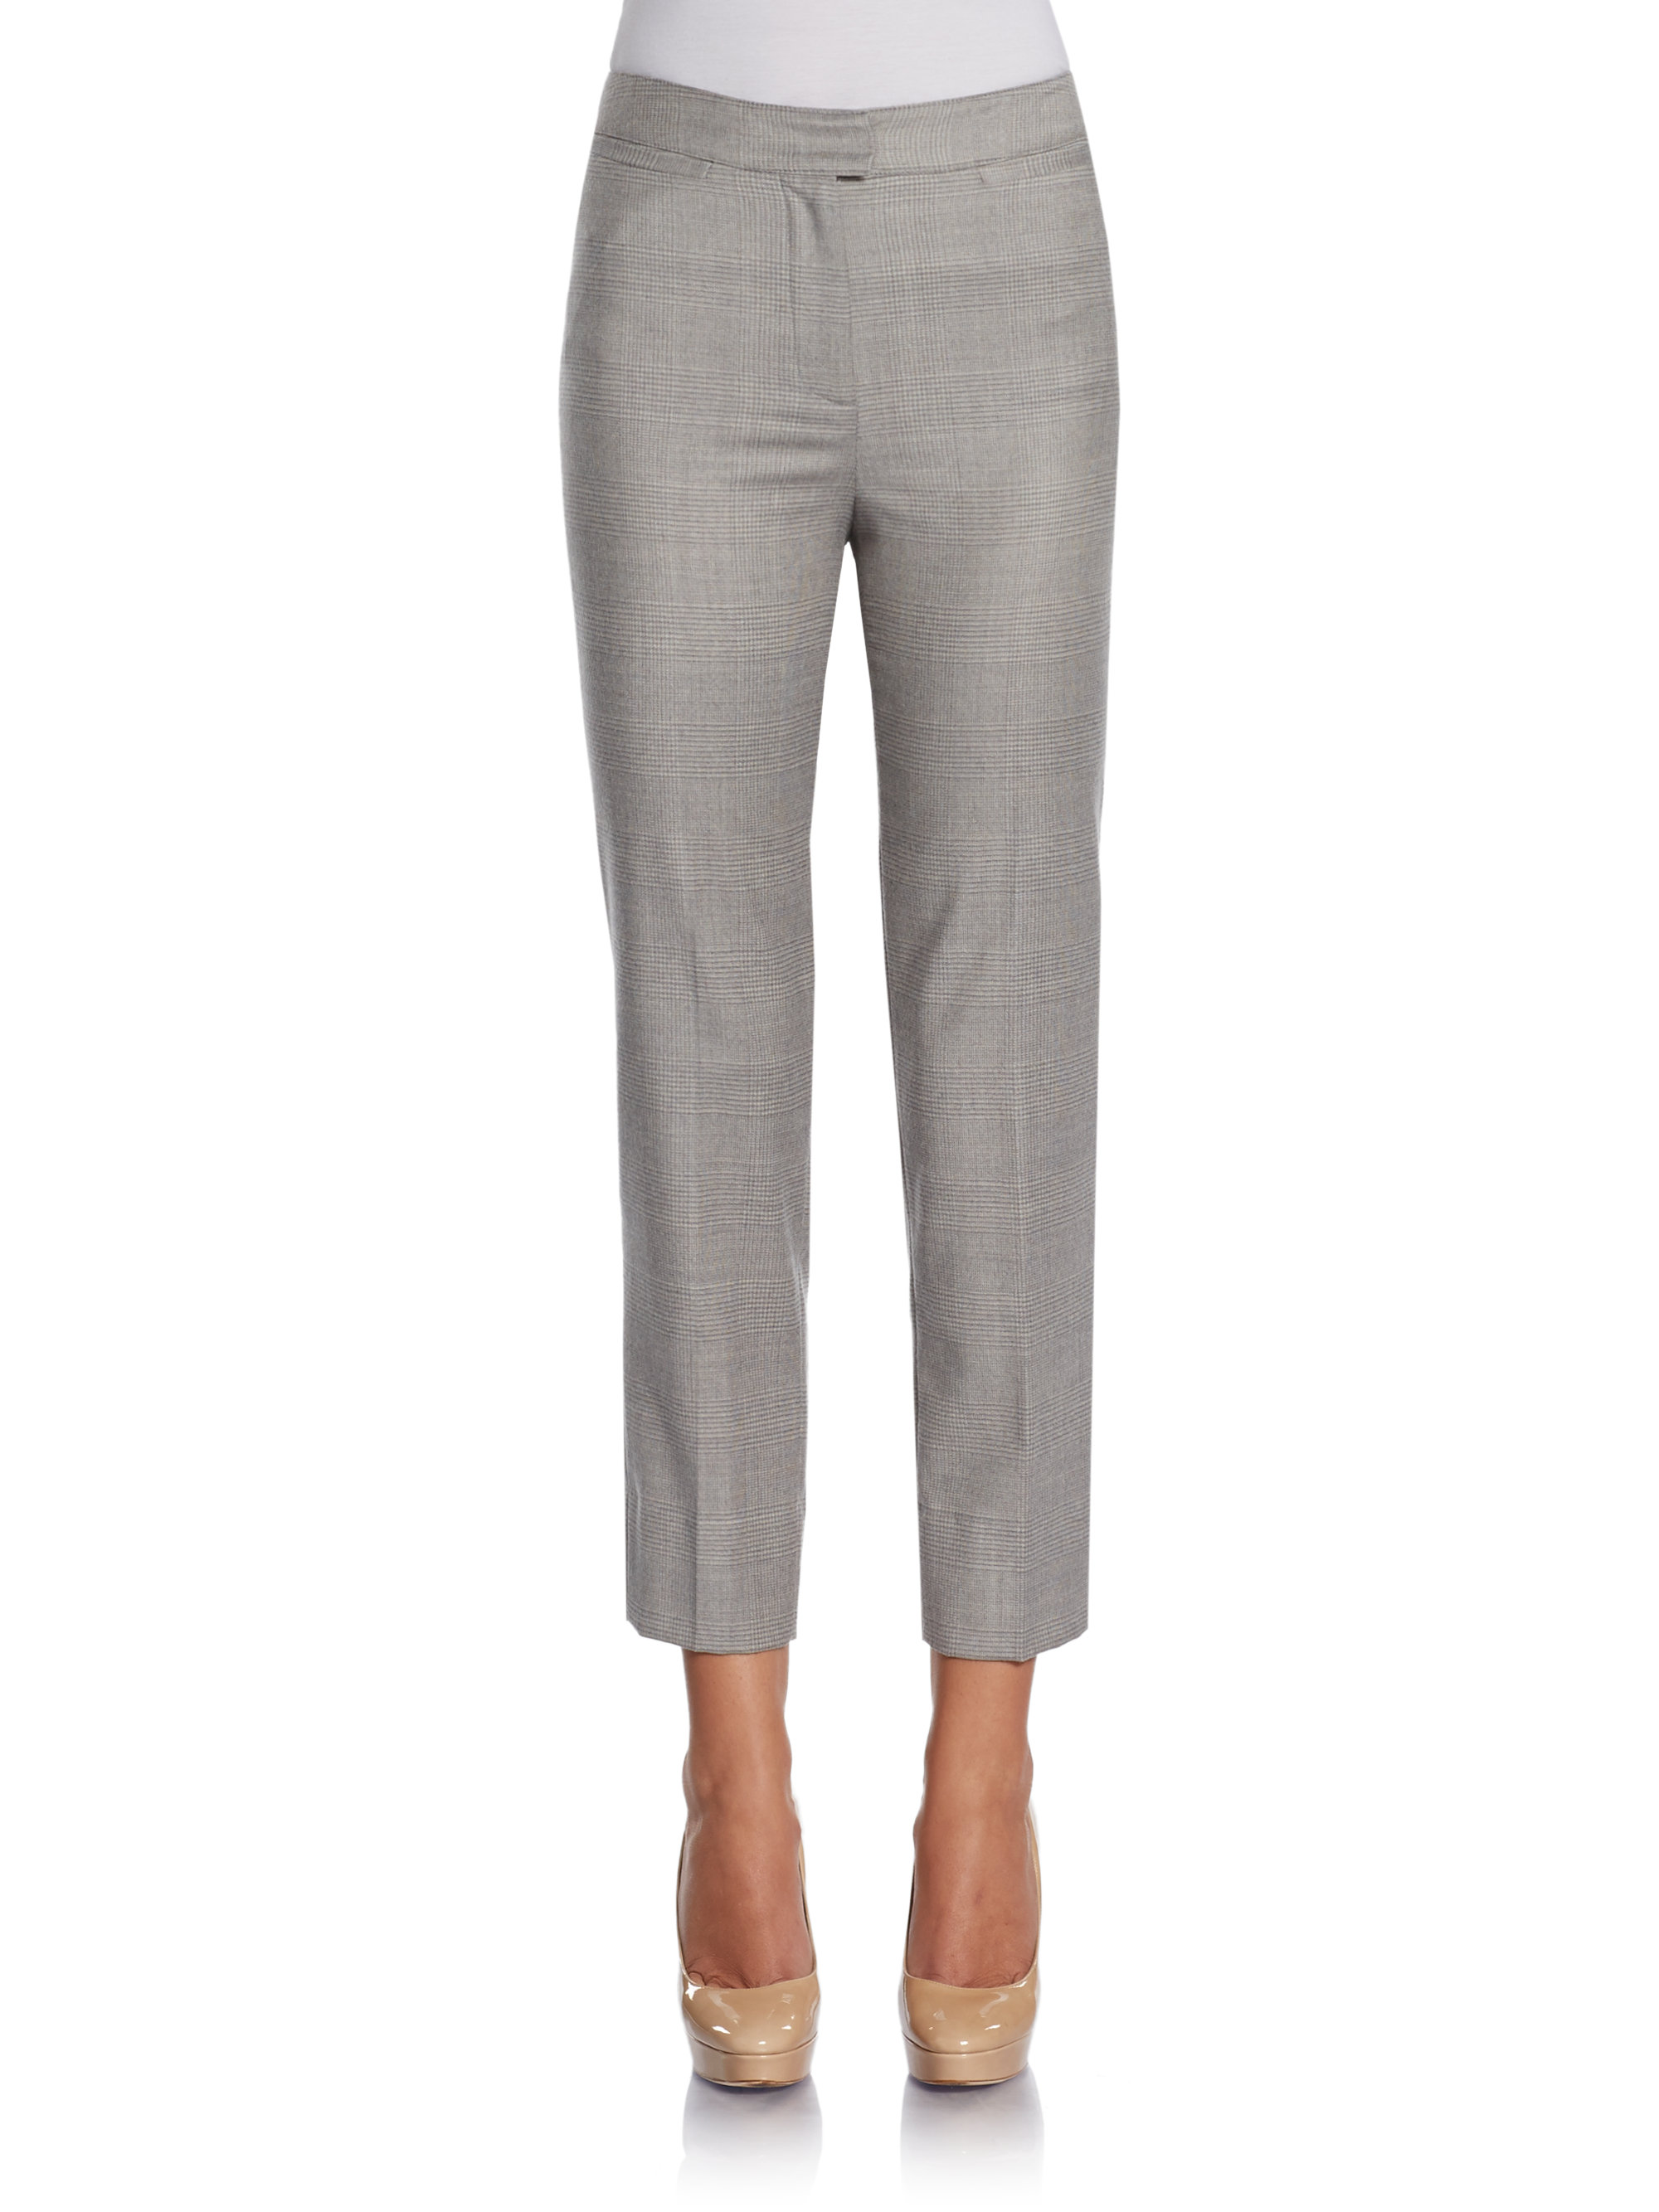 Piazza Sempione Plaid Wool Blend Ankle Pants in Light Grey (Gray) - Lyst